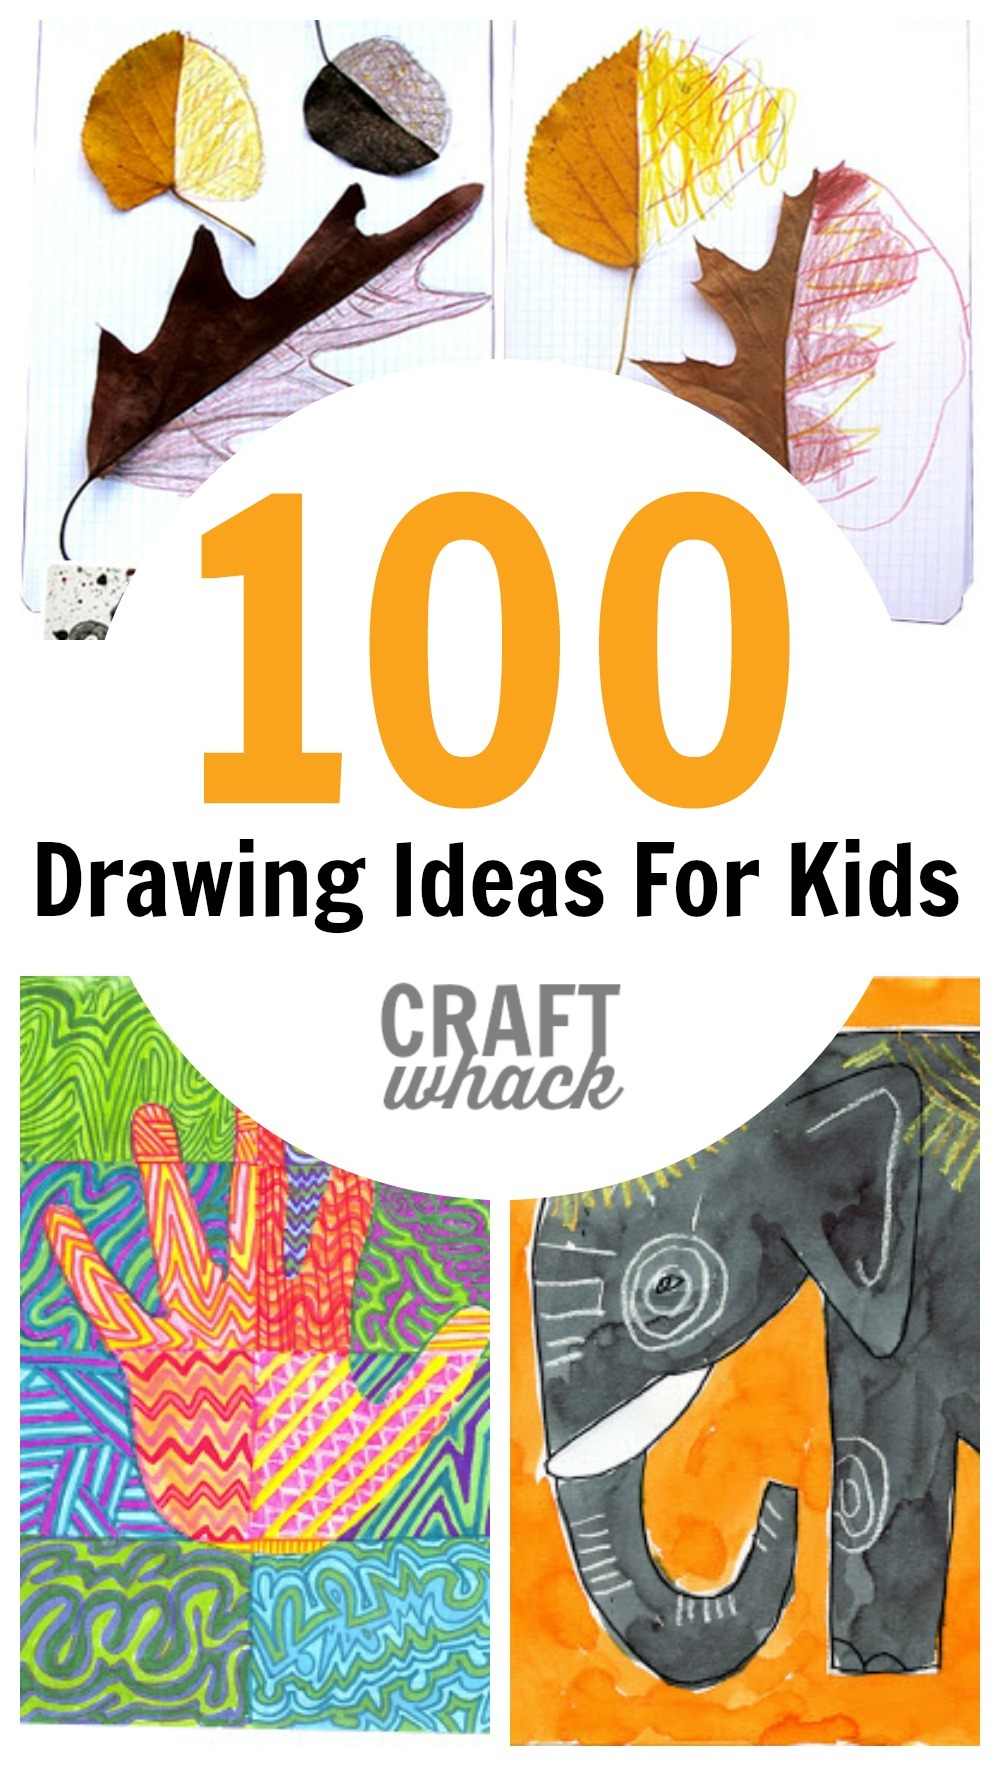 10 Unique Ideas For Kids To Draw 100 crazy cool drawing ideas for kids c2b7 craftwhack 1 2024